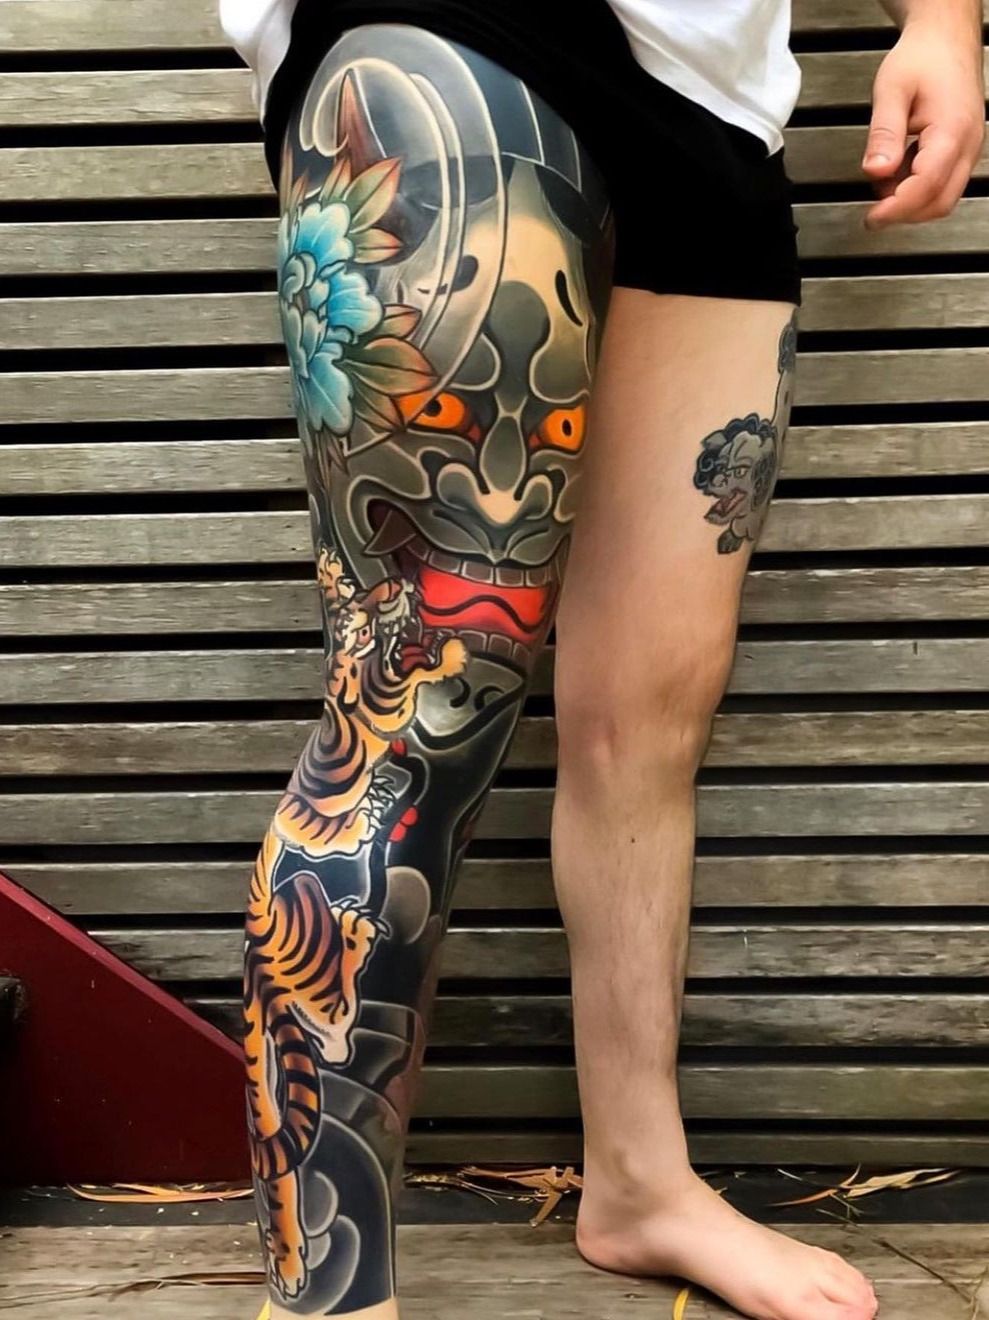 Black and grey tiger tattoo on the right thigh